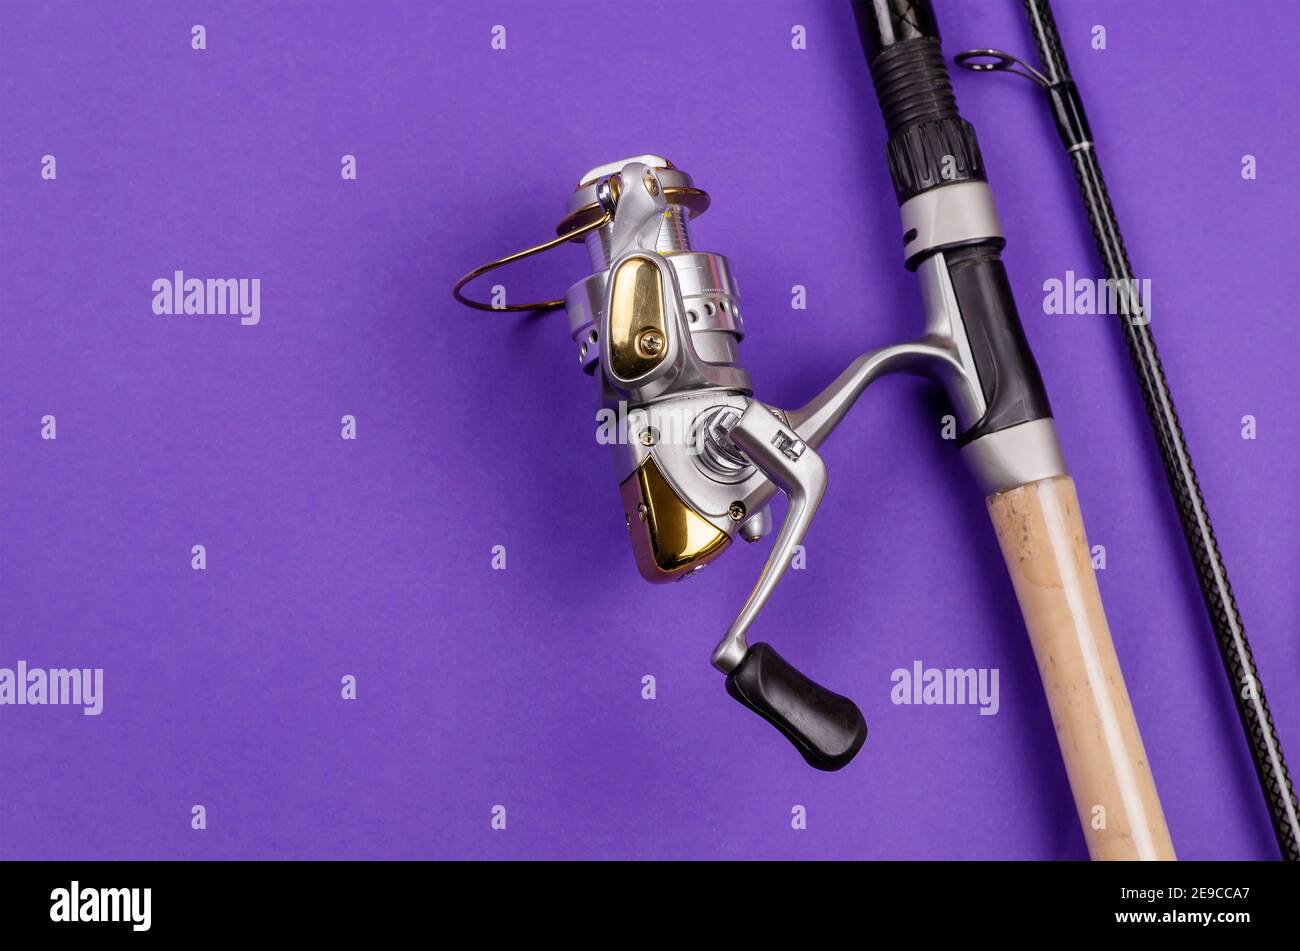 https://c8.alamy.com/comp/2E9CCA7/fishing-rod-with-attached-fly-fishing-reel-on-blue-background-fishing-tackle-sport-selective-focus-2E9CCA7.jpg